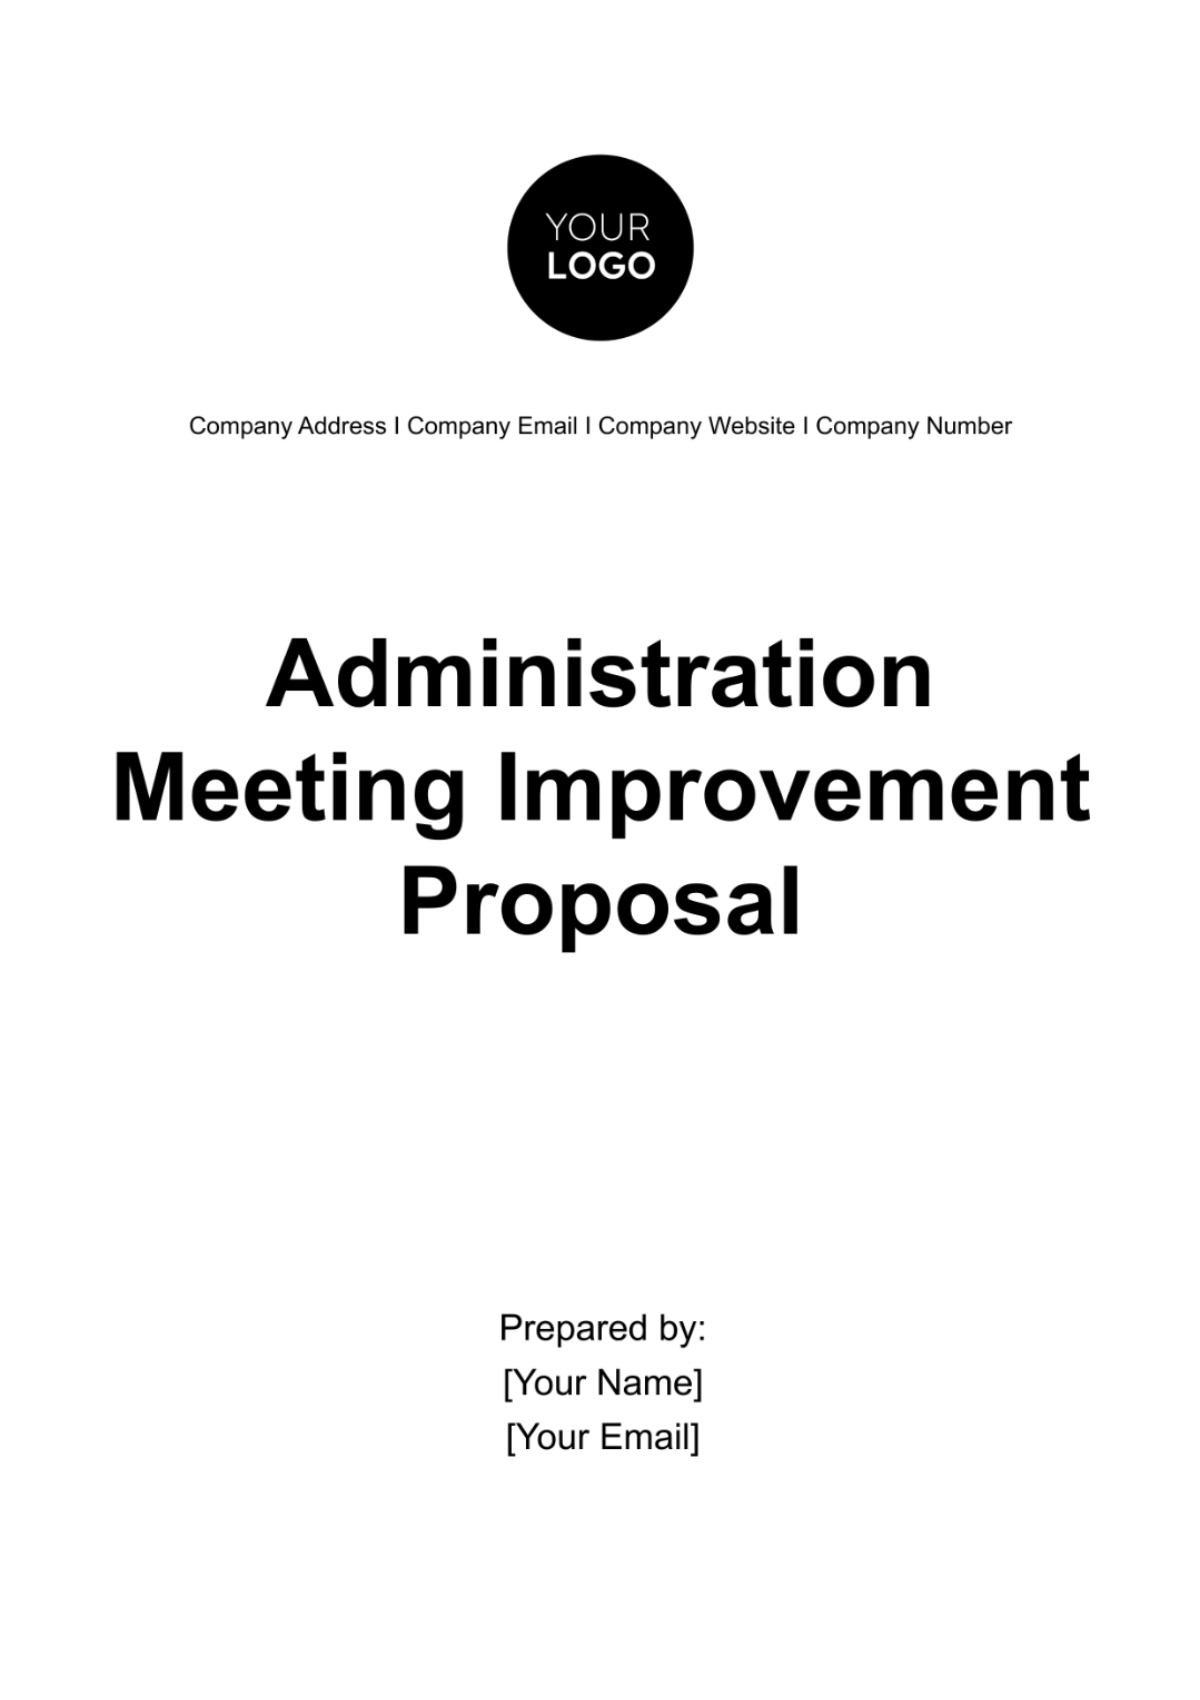 Administration Meeting Improvement Proposal Template